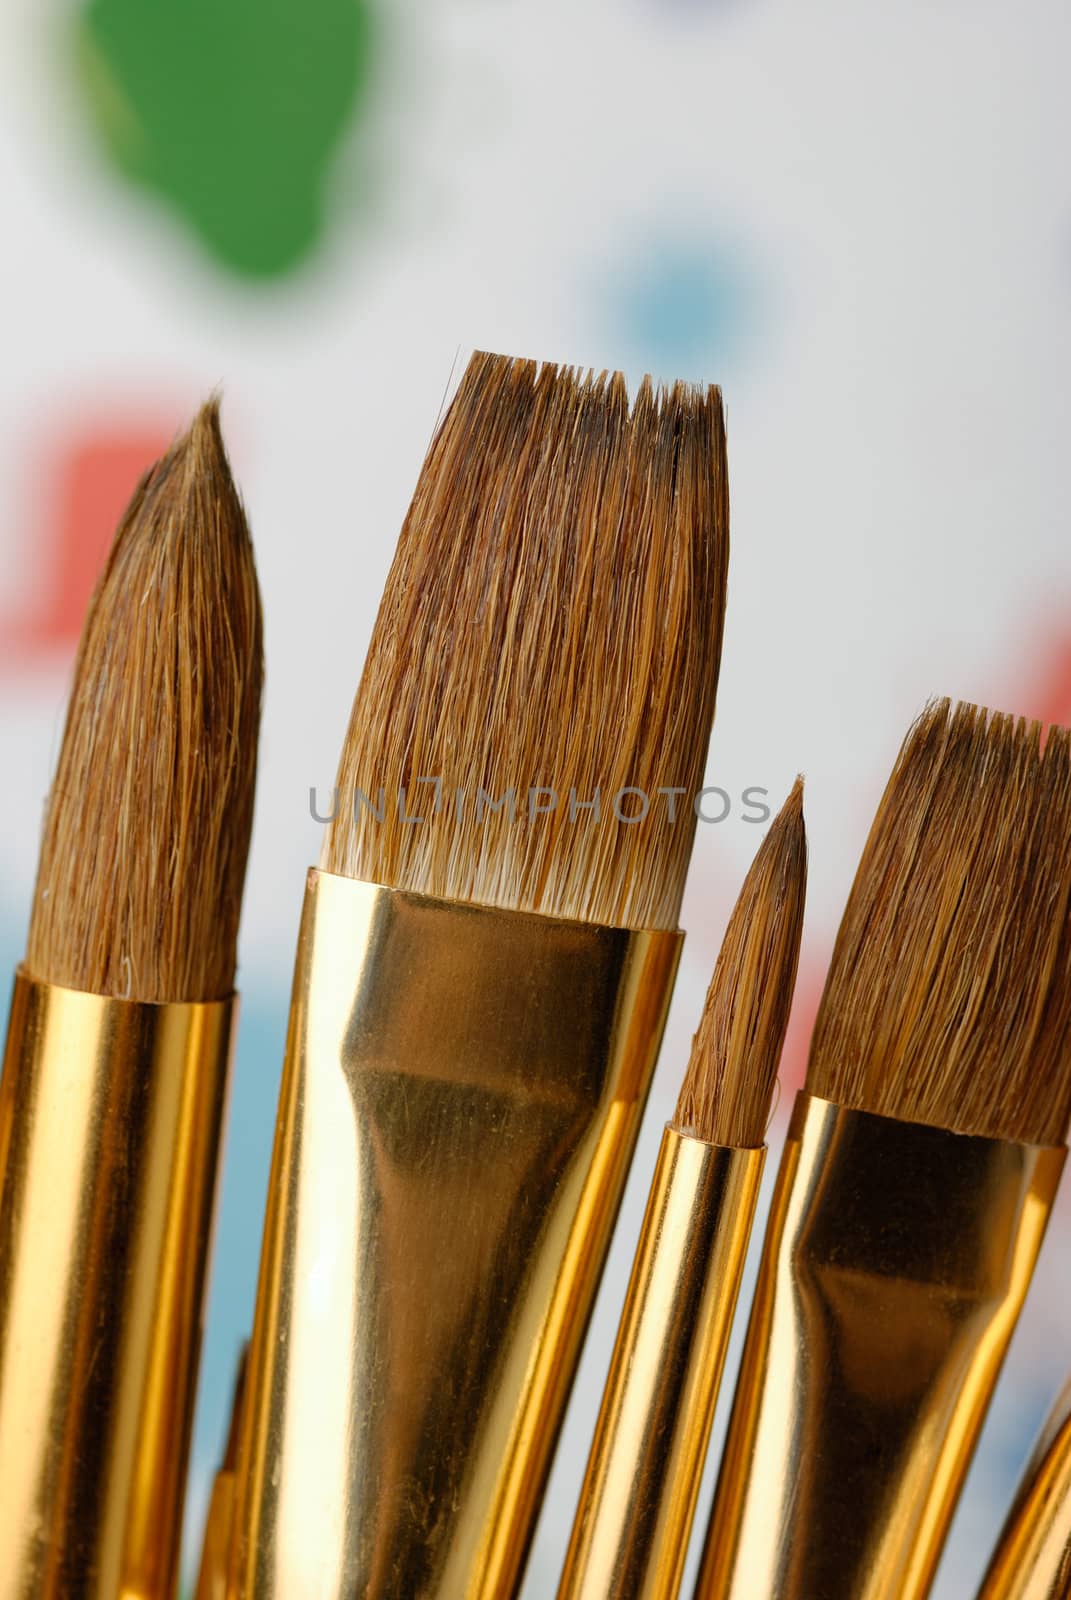 Paintbrush. Brushes for drawing. C blur a color background